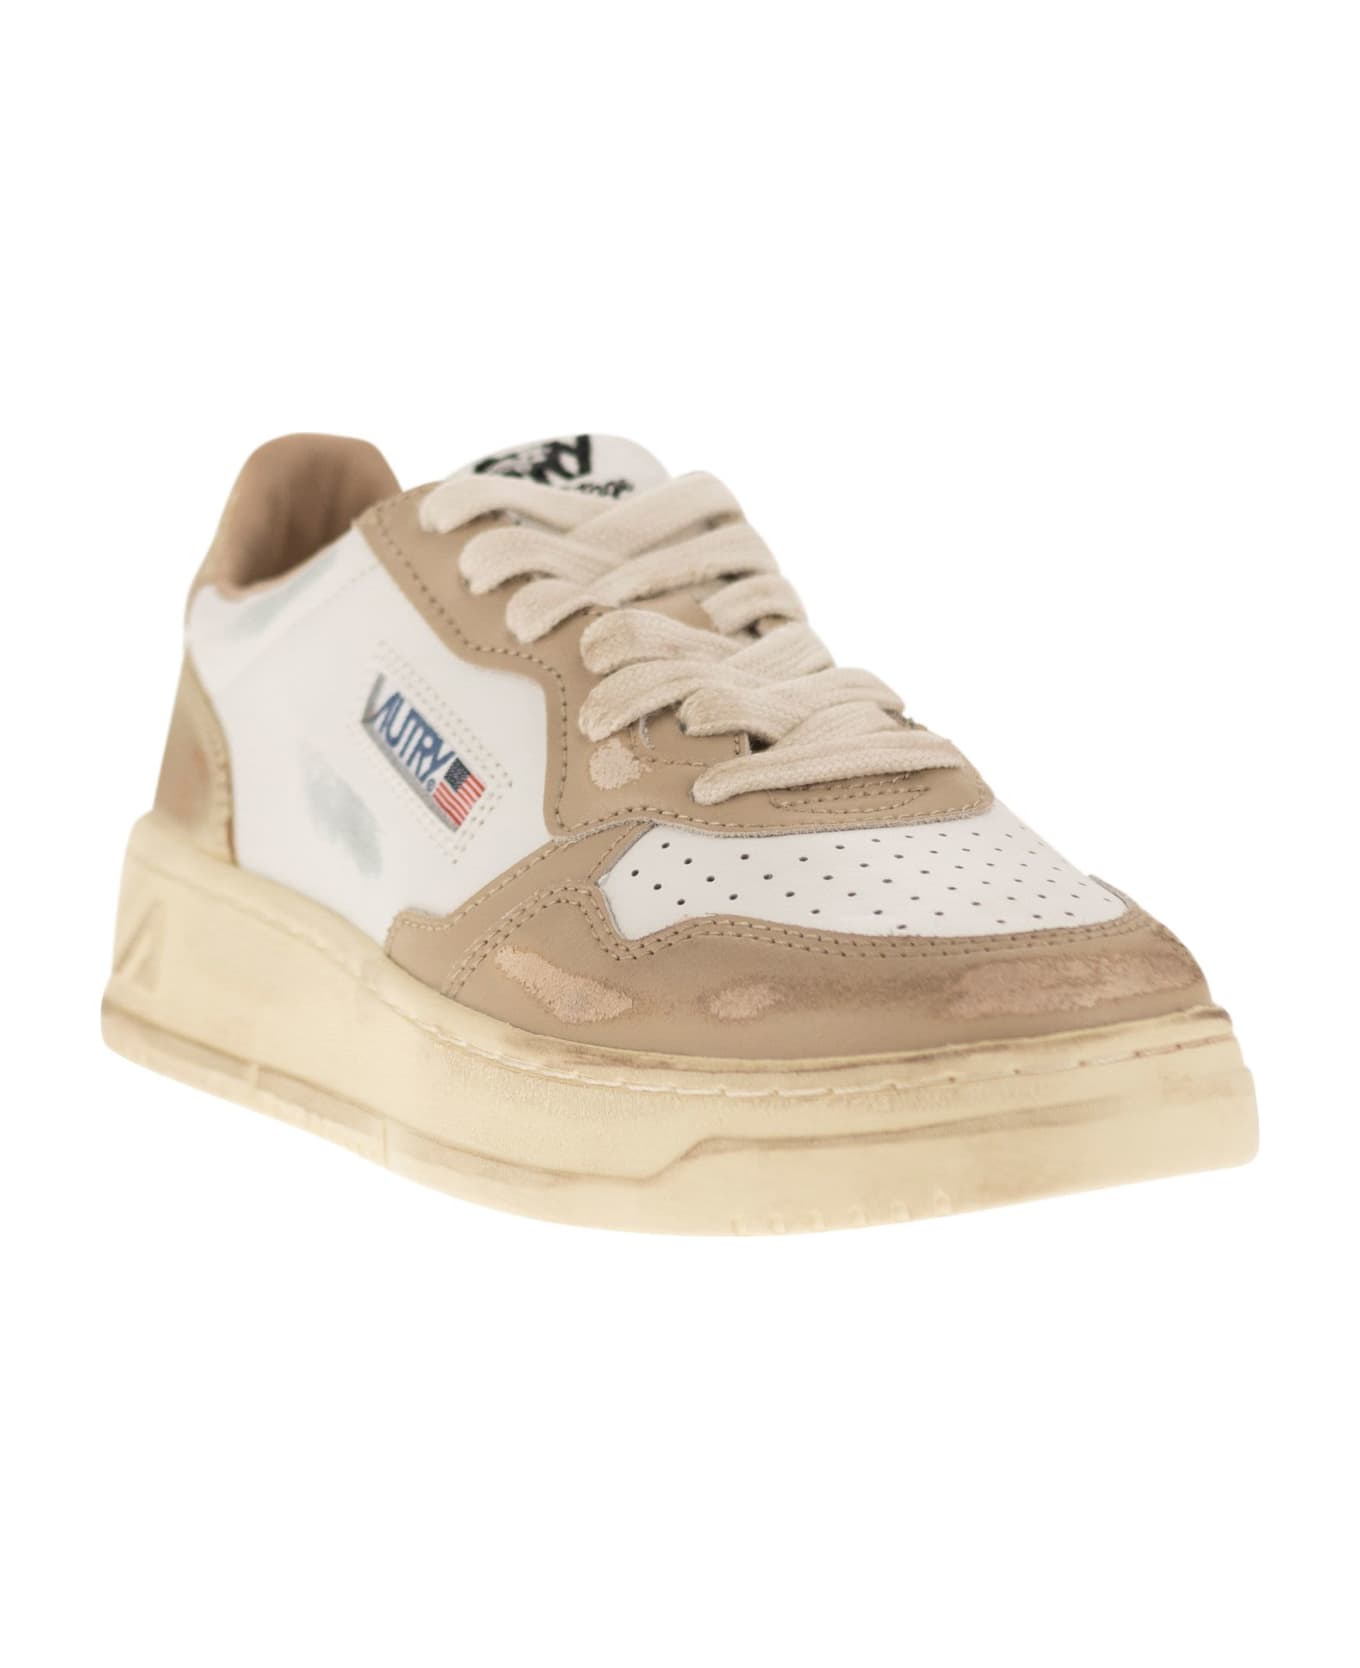 Autry Medalist Low Super Vintage Sneakers - White/gold